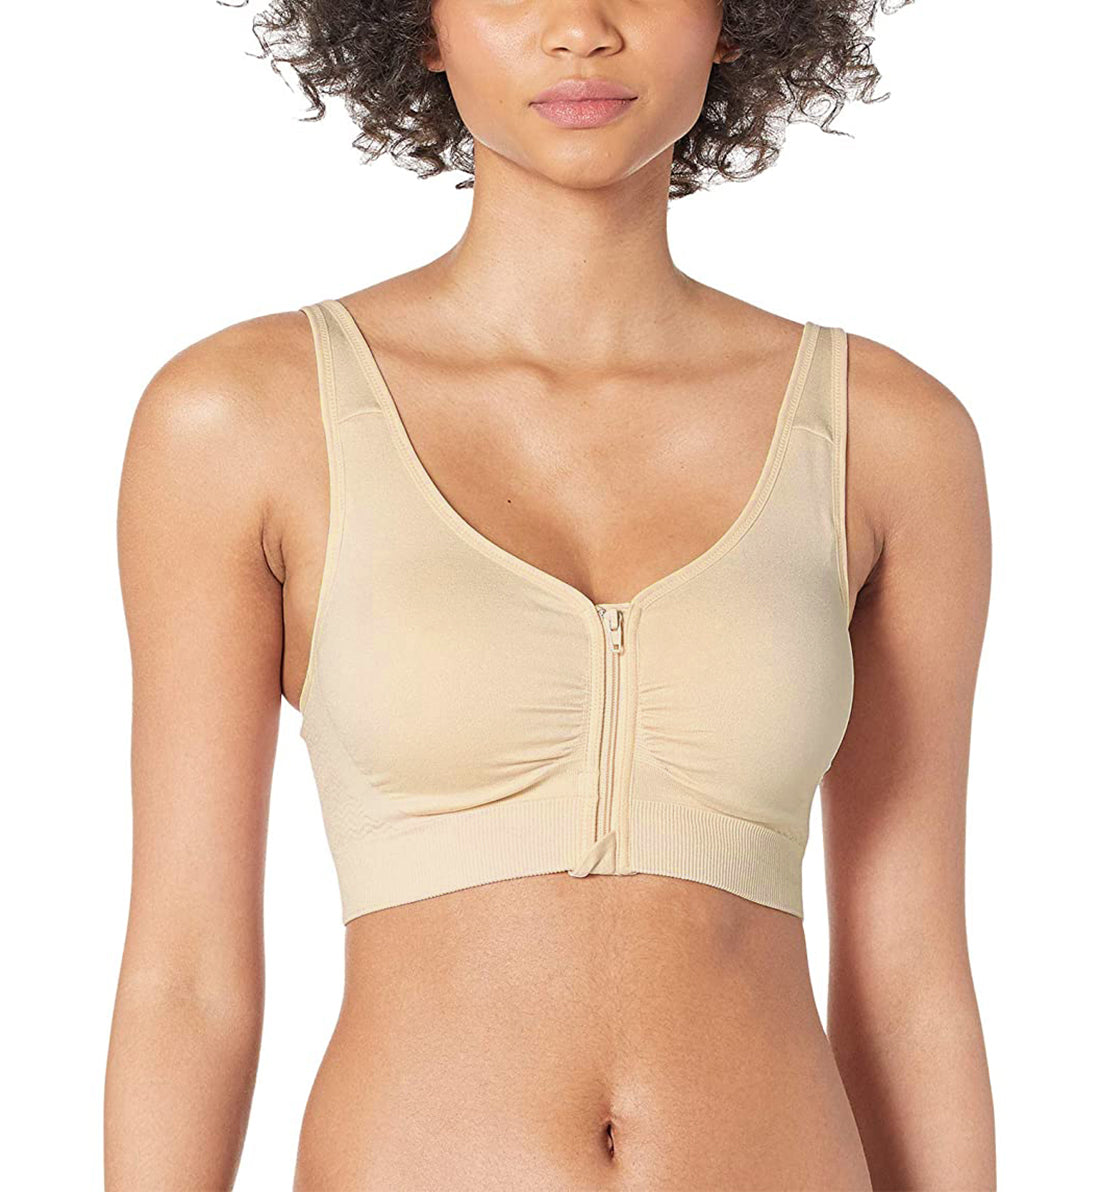 Best mastectomy bras for post-surgery UK